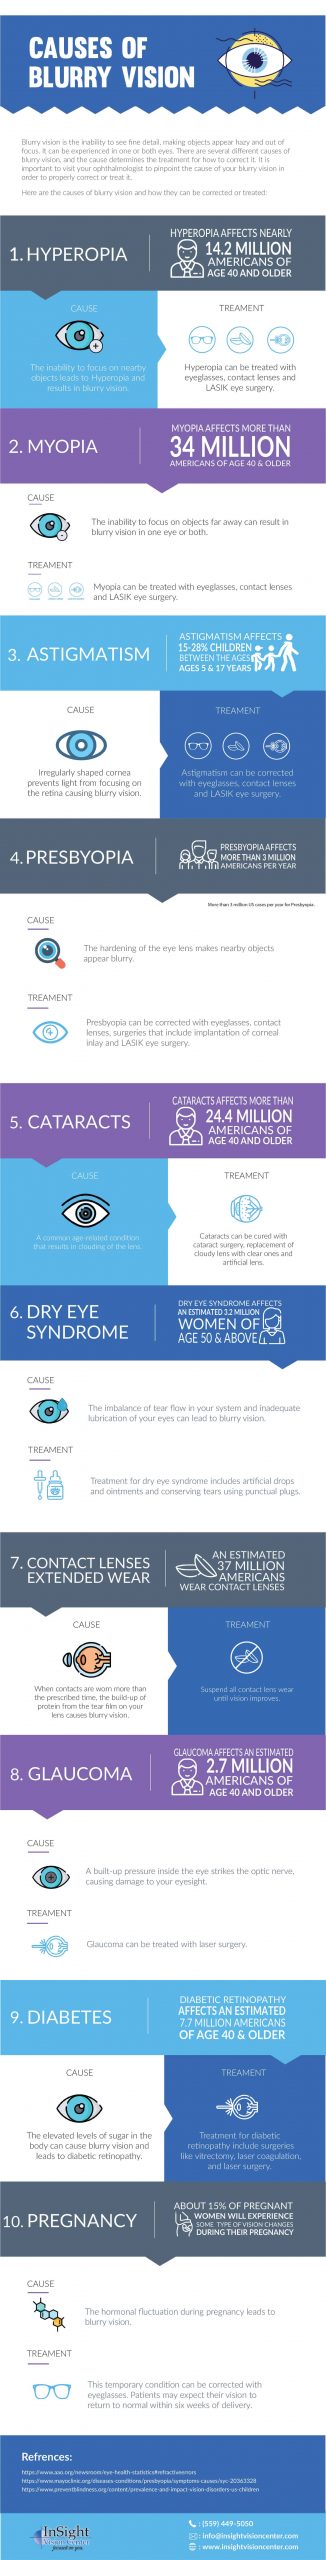 Causes of Blurry Vision